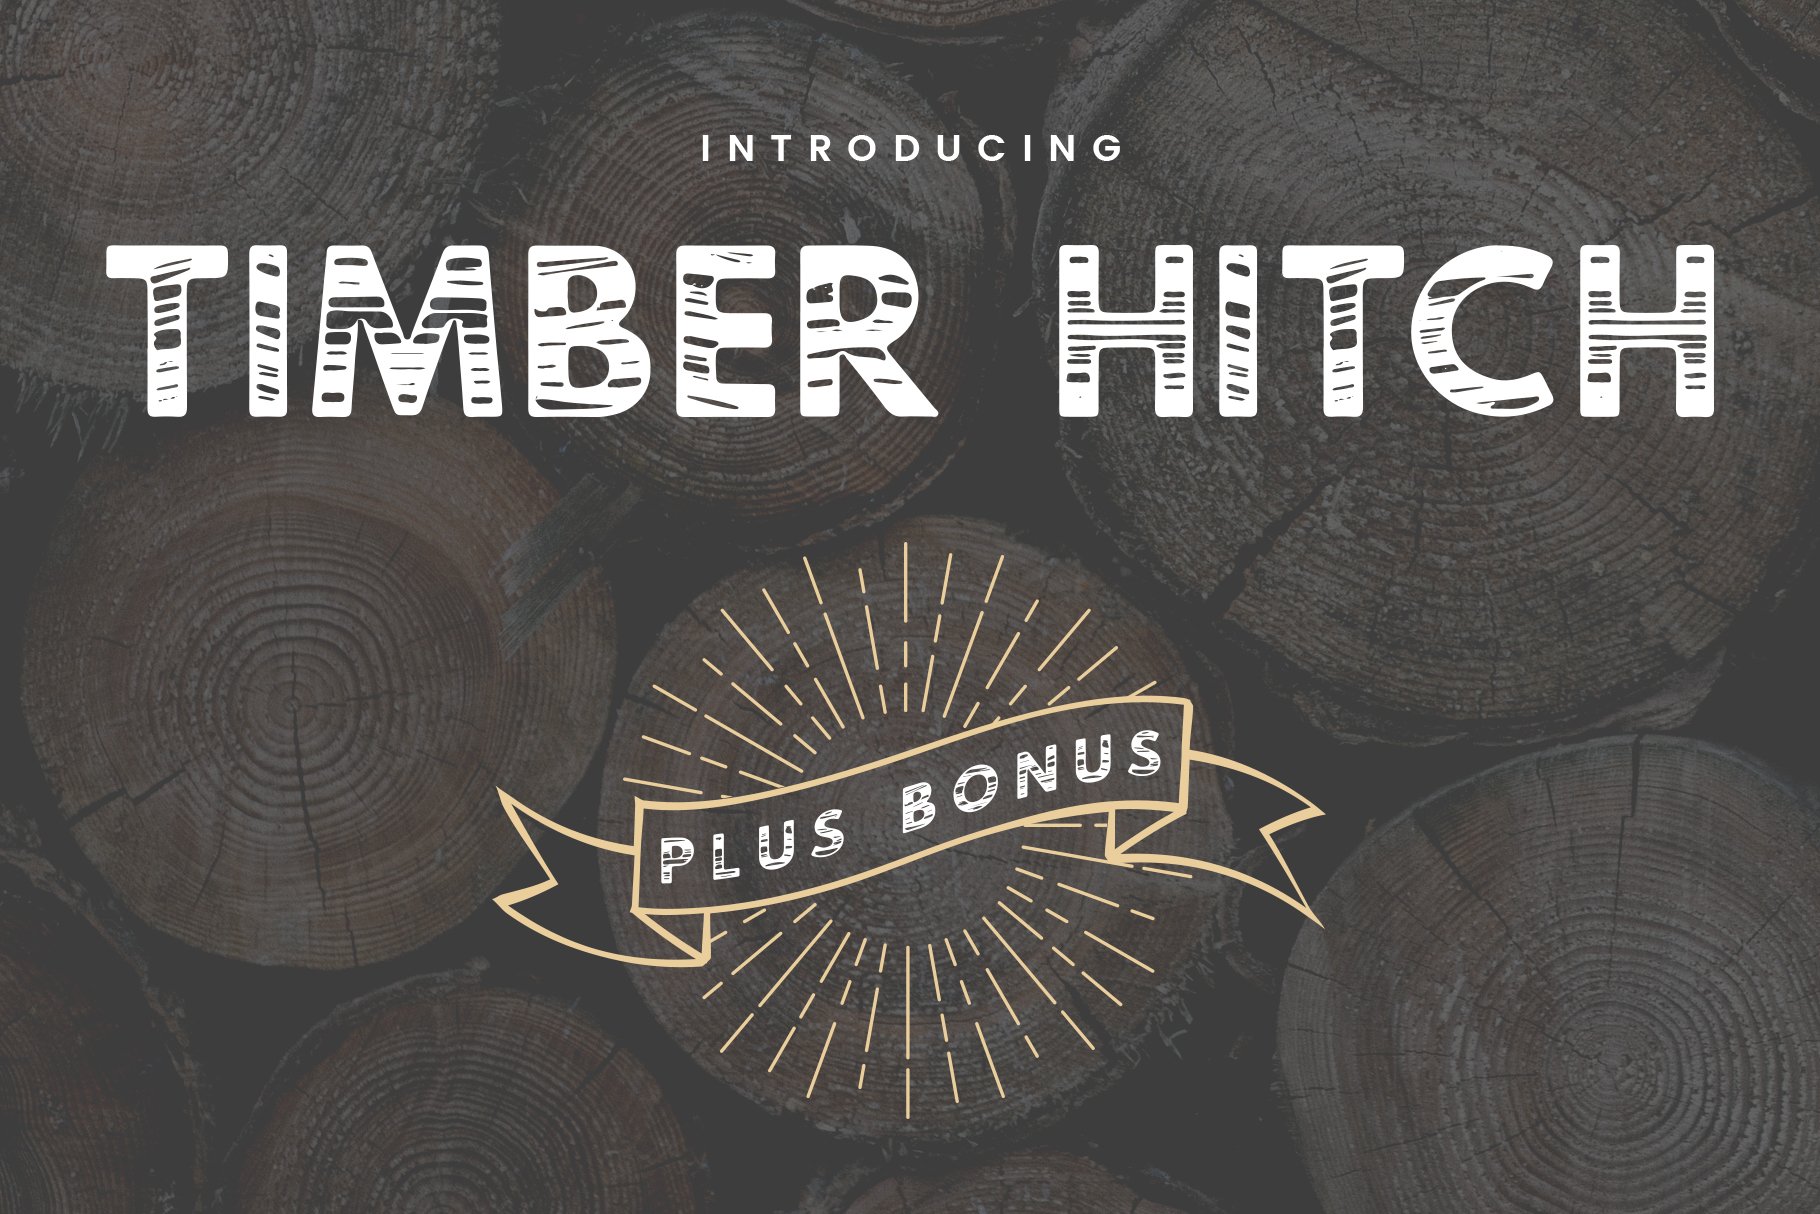 Timber Hitch Font + Nature Designs cover image.